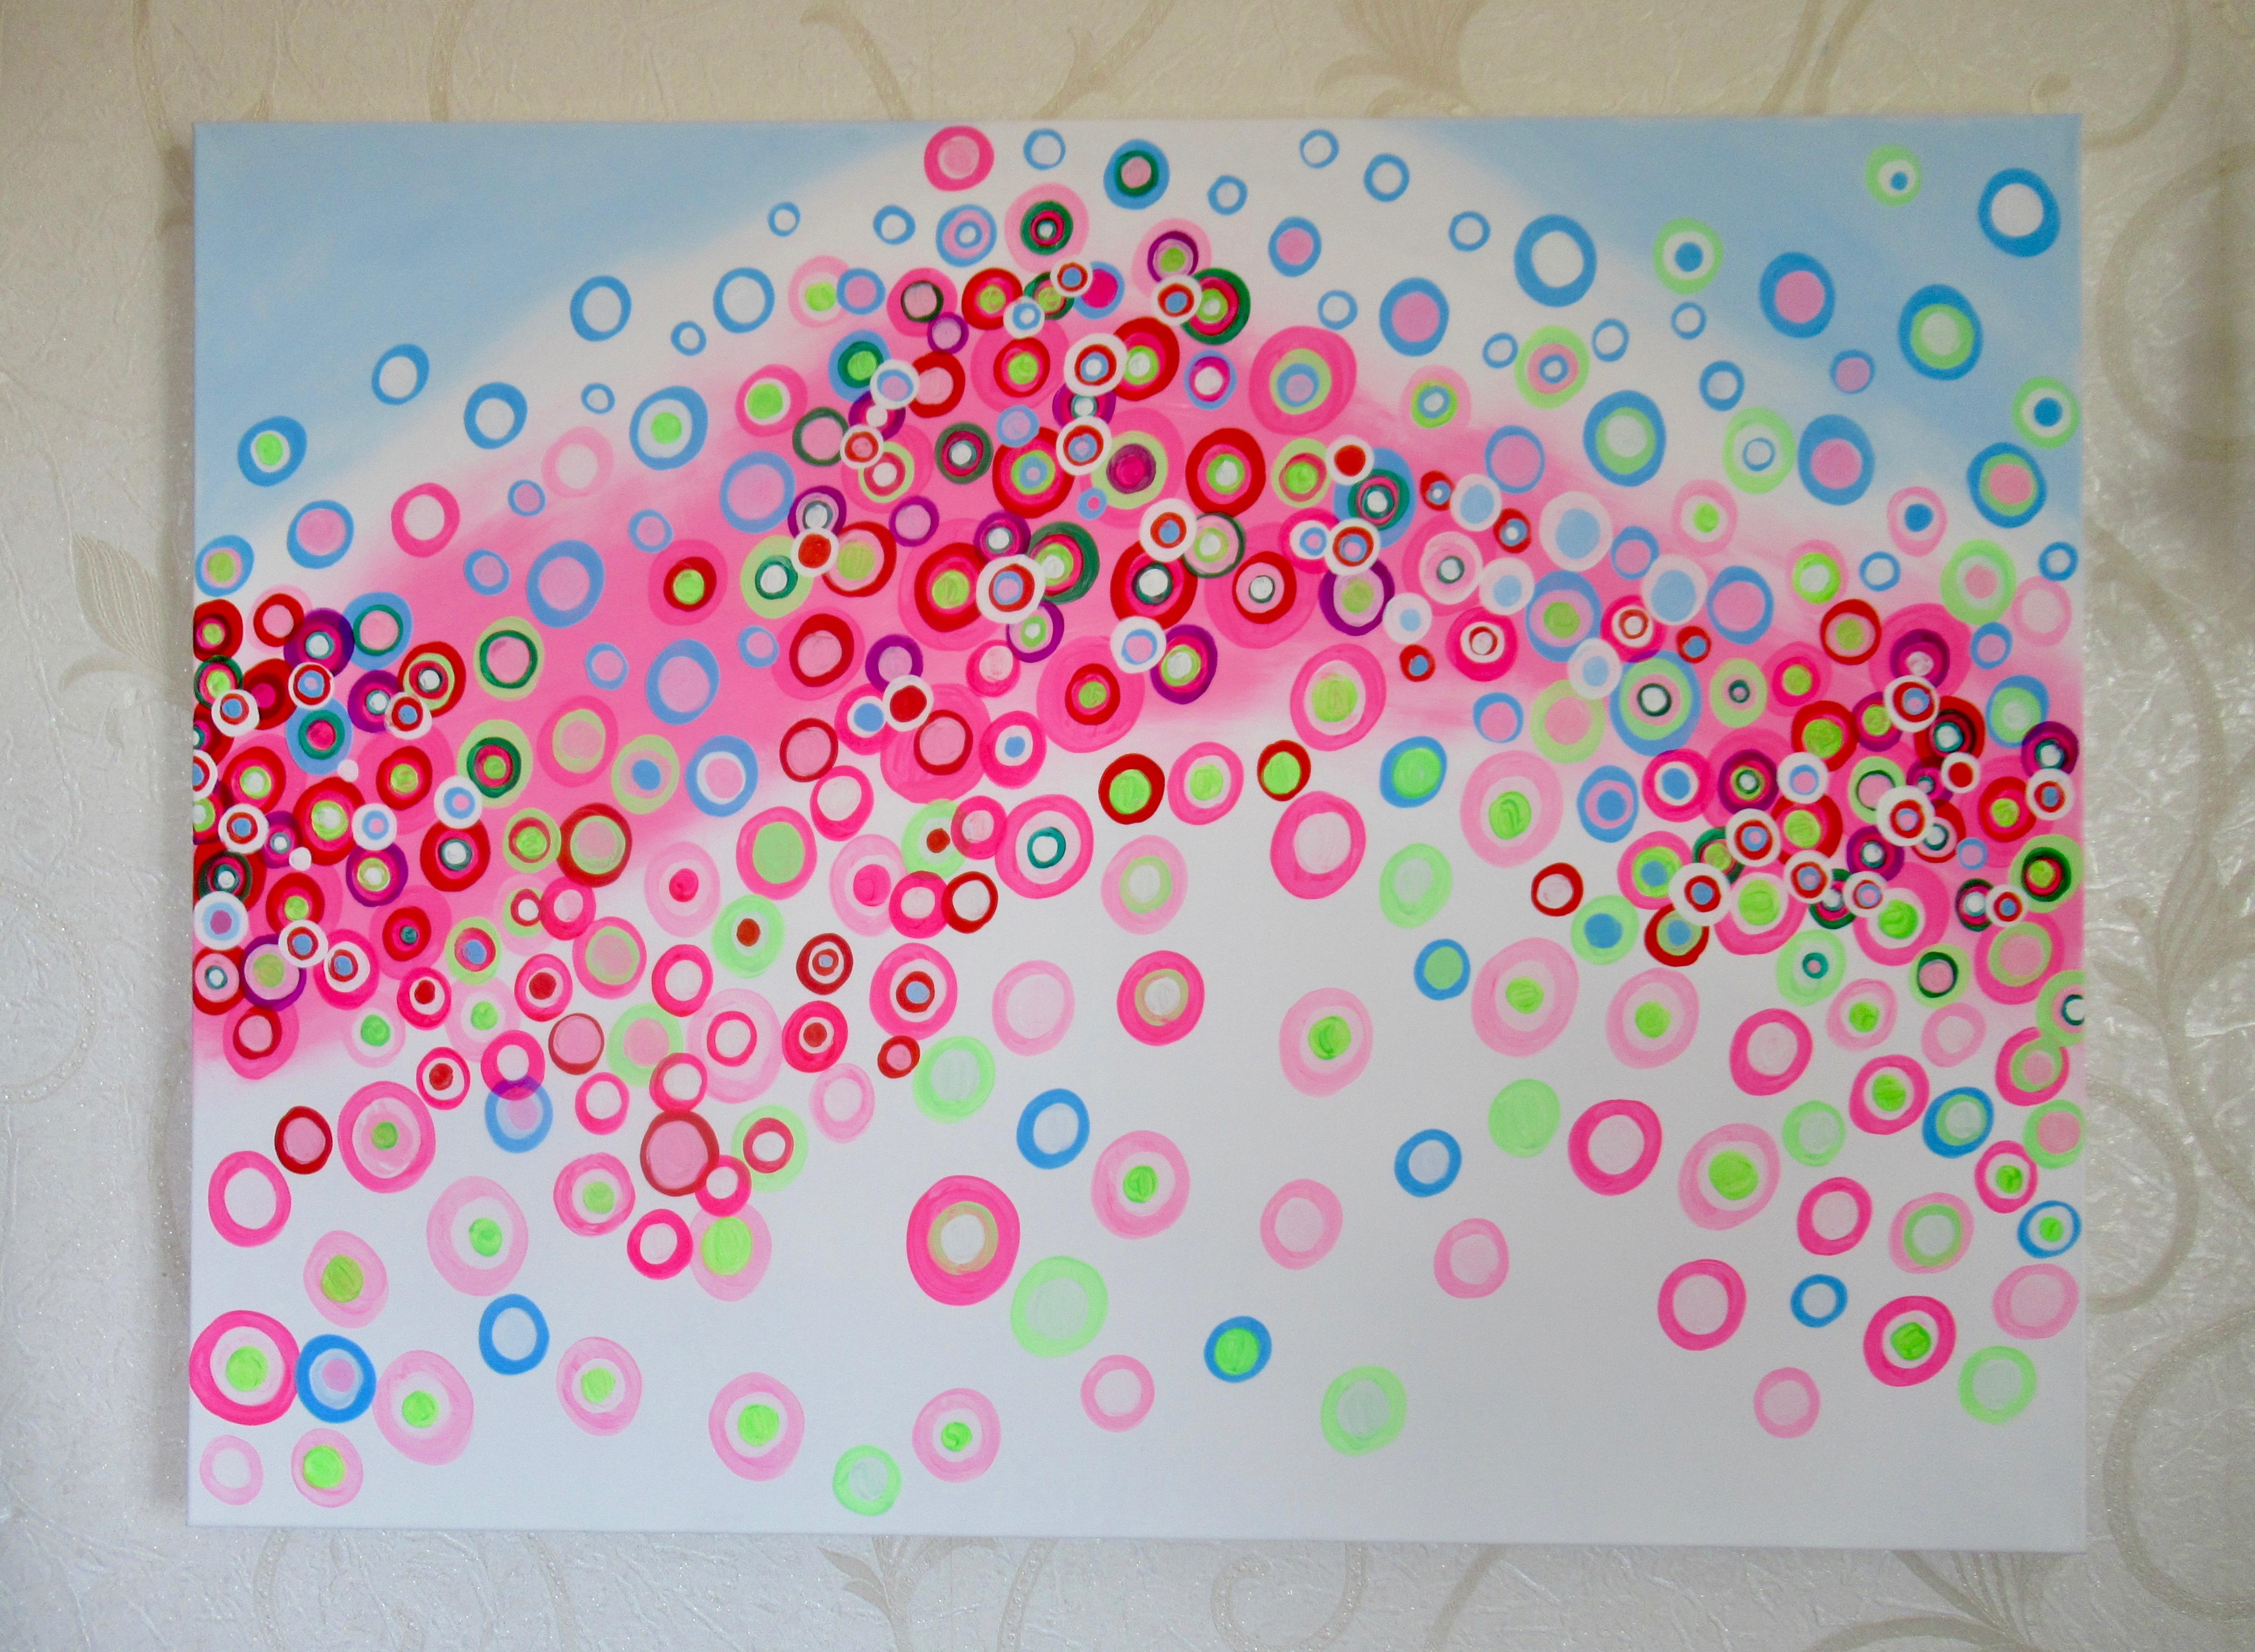 <p>Artist Comments<br />Pink and red circles roll in a wave. Reminiscent of rose petals gently floating in a fragrant bath. The piece exudes the calm and relaxed energy of spending time washing the day away, melting tension, and gathering oneself.